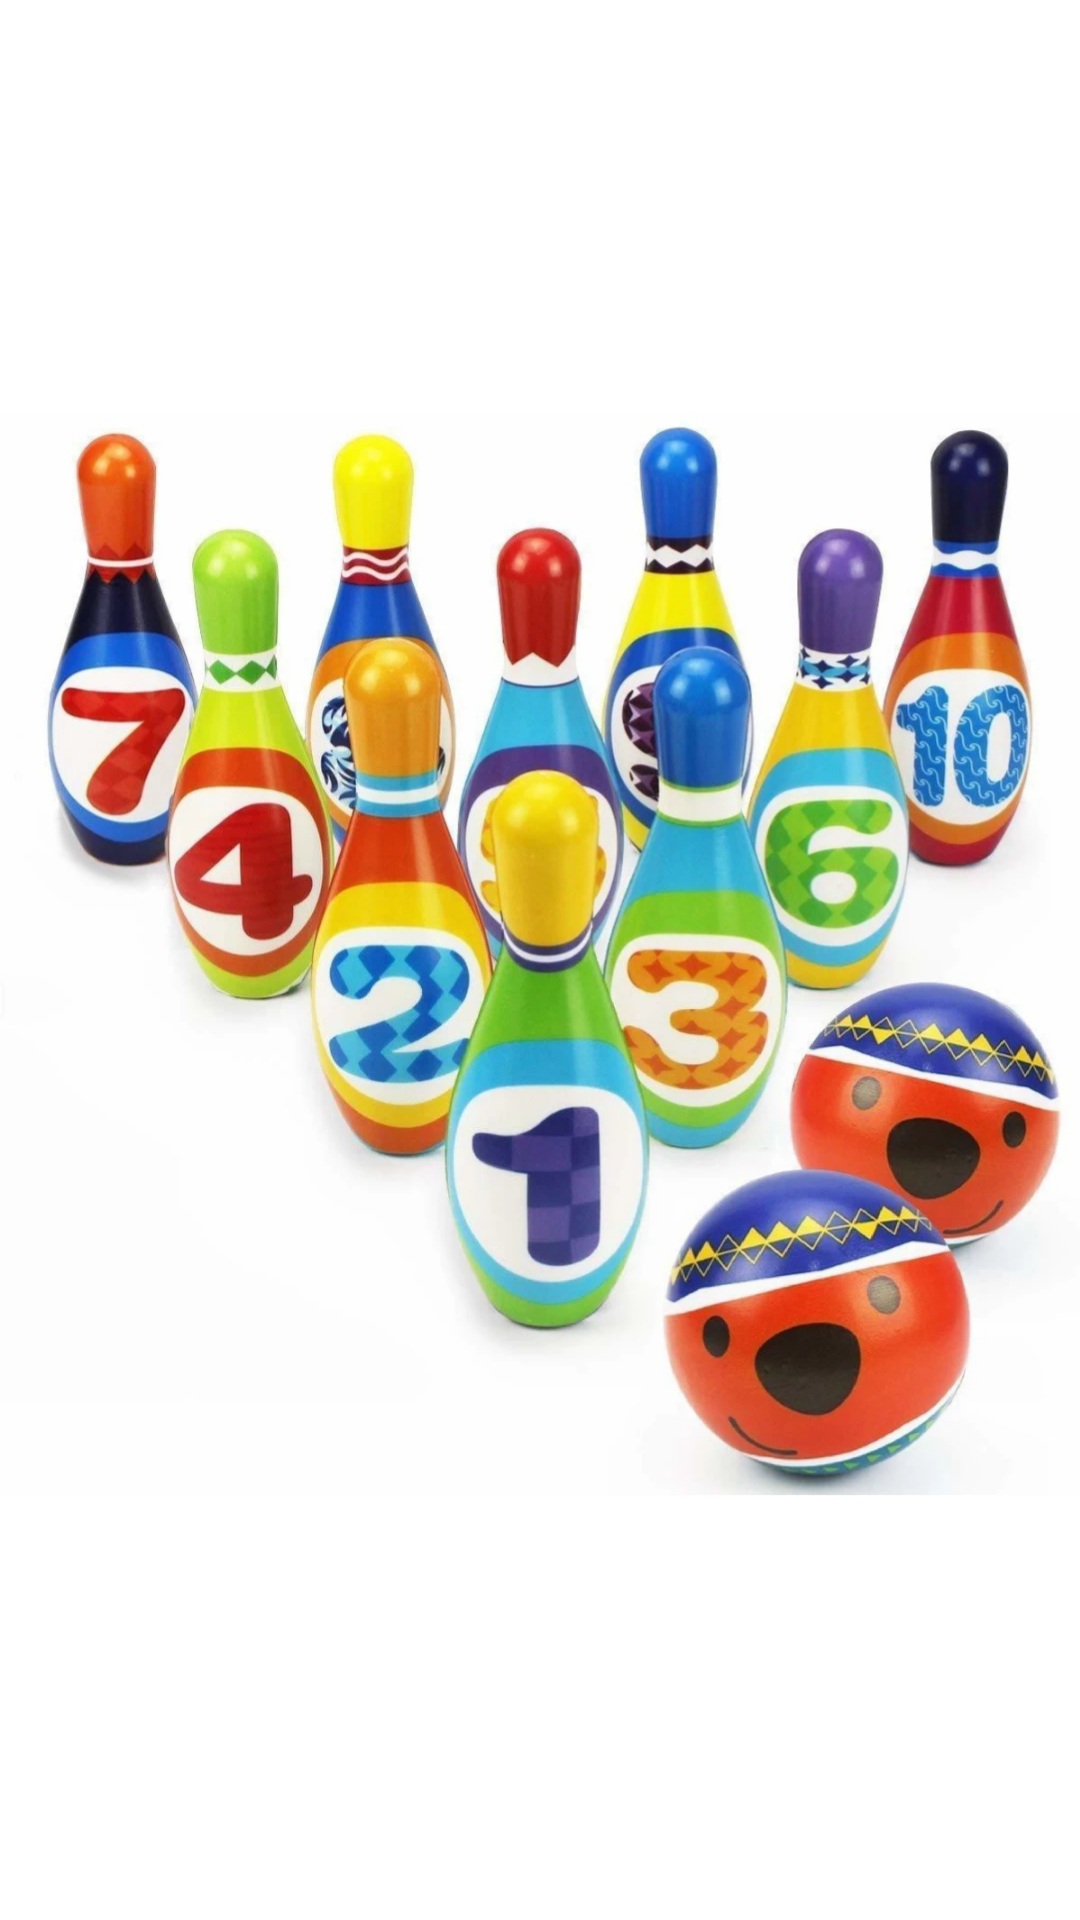 Bowling game set unbreakable foam material